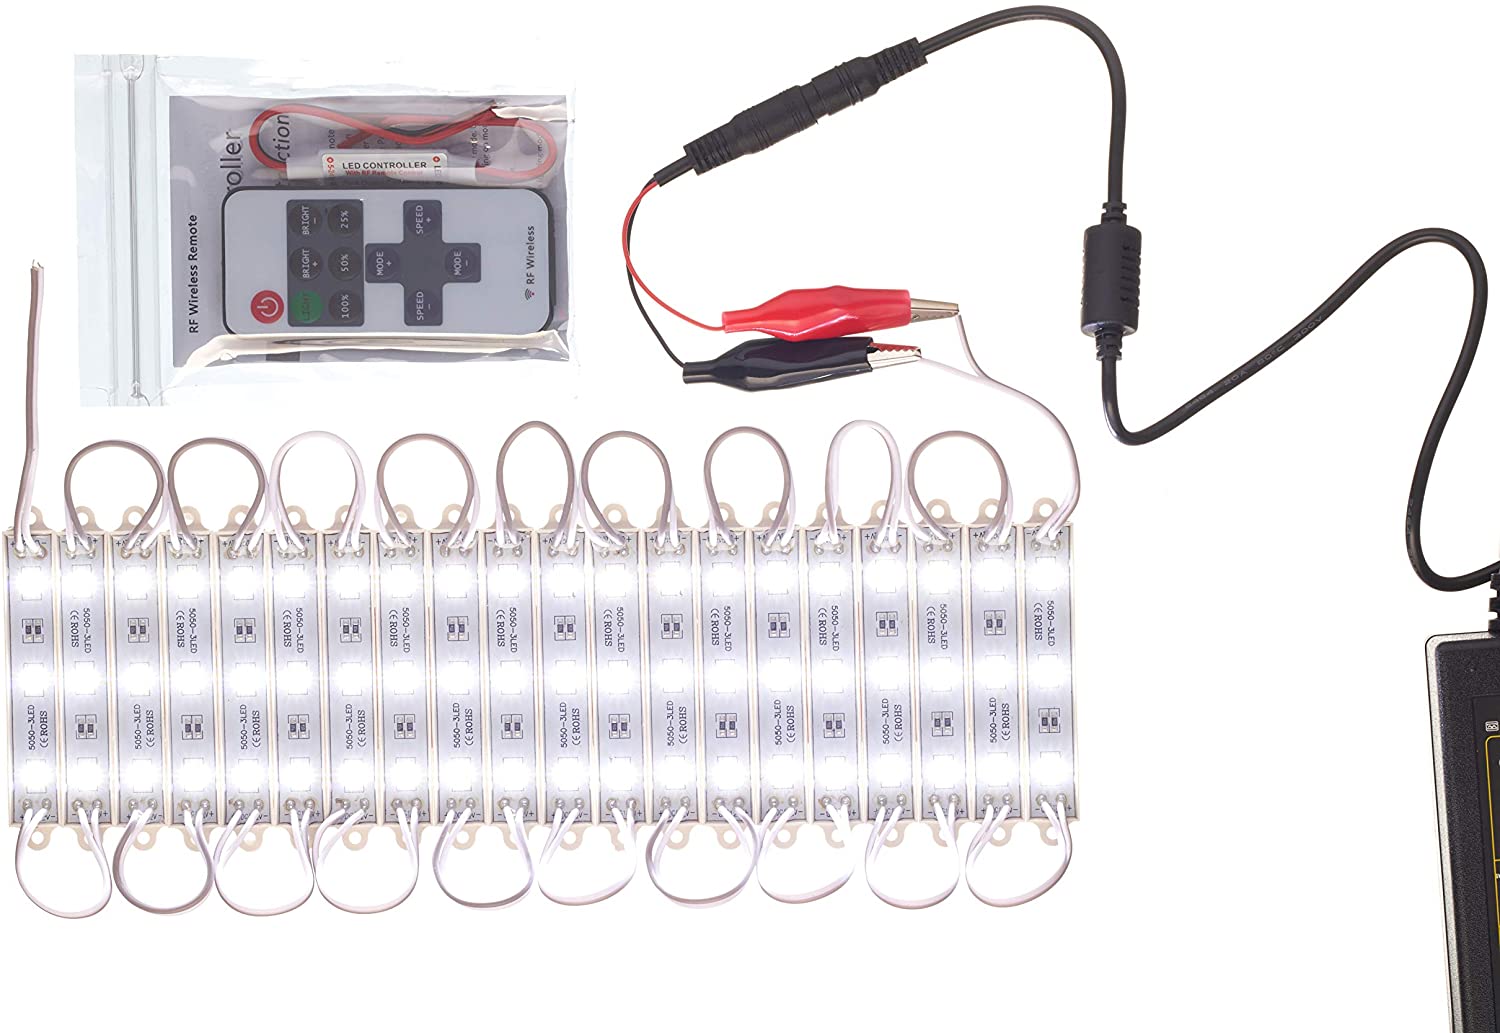 Super Bright 3 LED Module with Remote - 5050 Injection Module with 12V AC Power Adapter